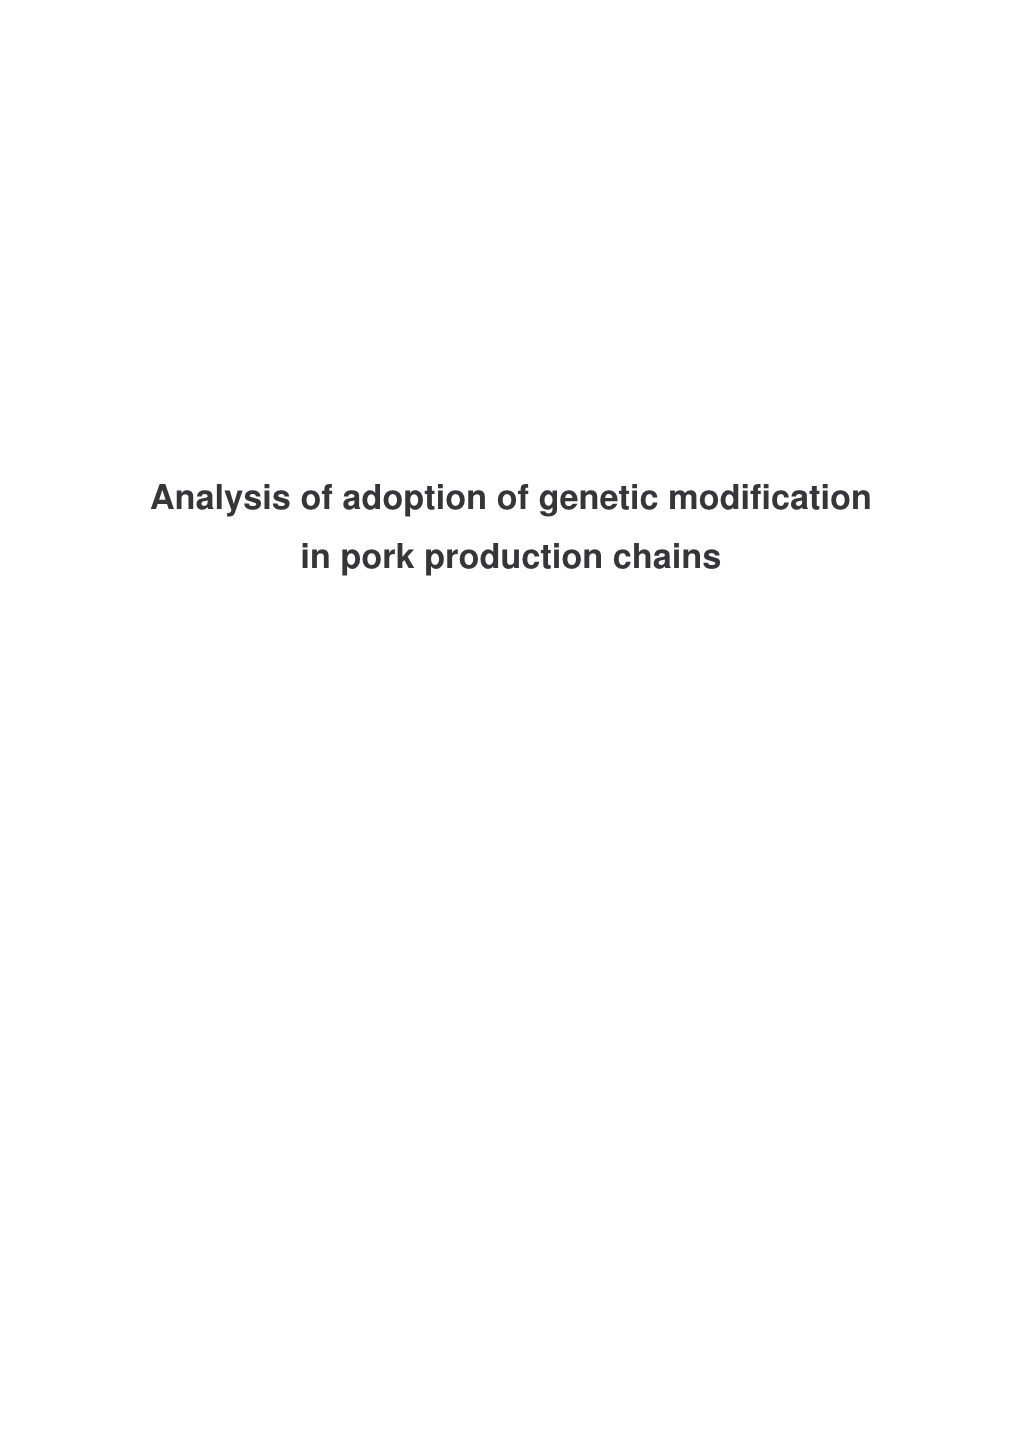 Analysis of Adoption of Genetic Modification in Pork Production Chains